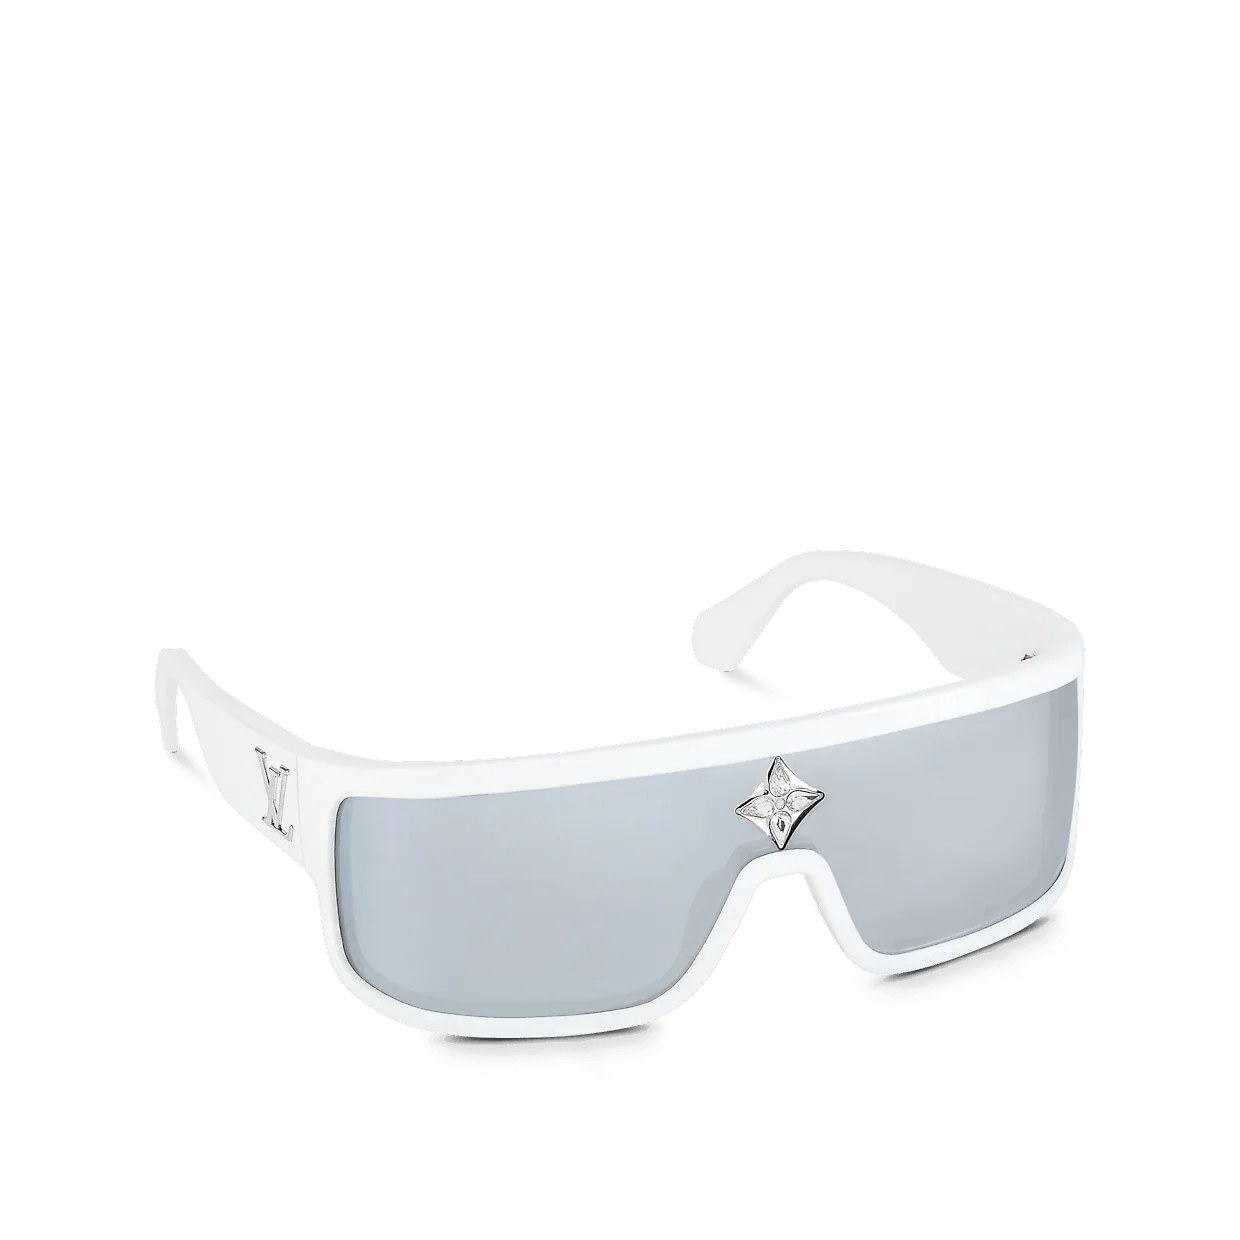 Cyclone Sport Mask Sunglasses S00 - OBSOLETES DO NOT TOUCH Z1742U